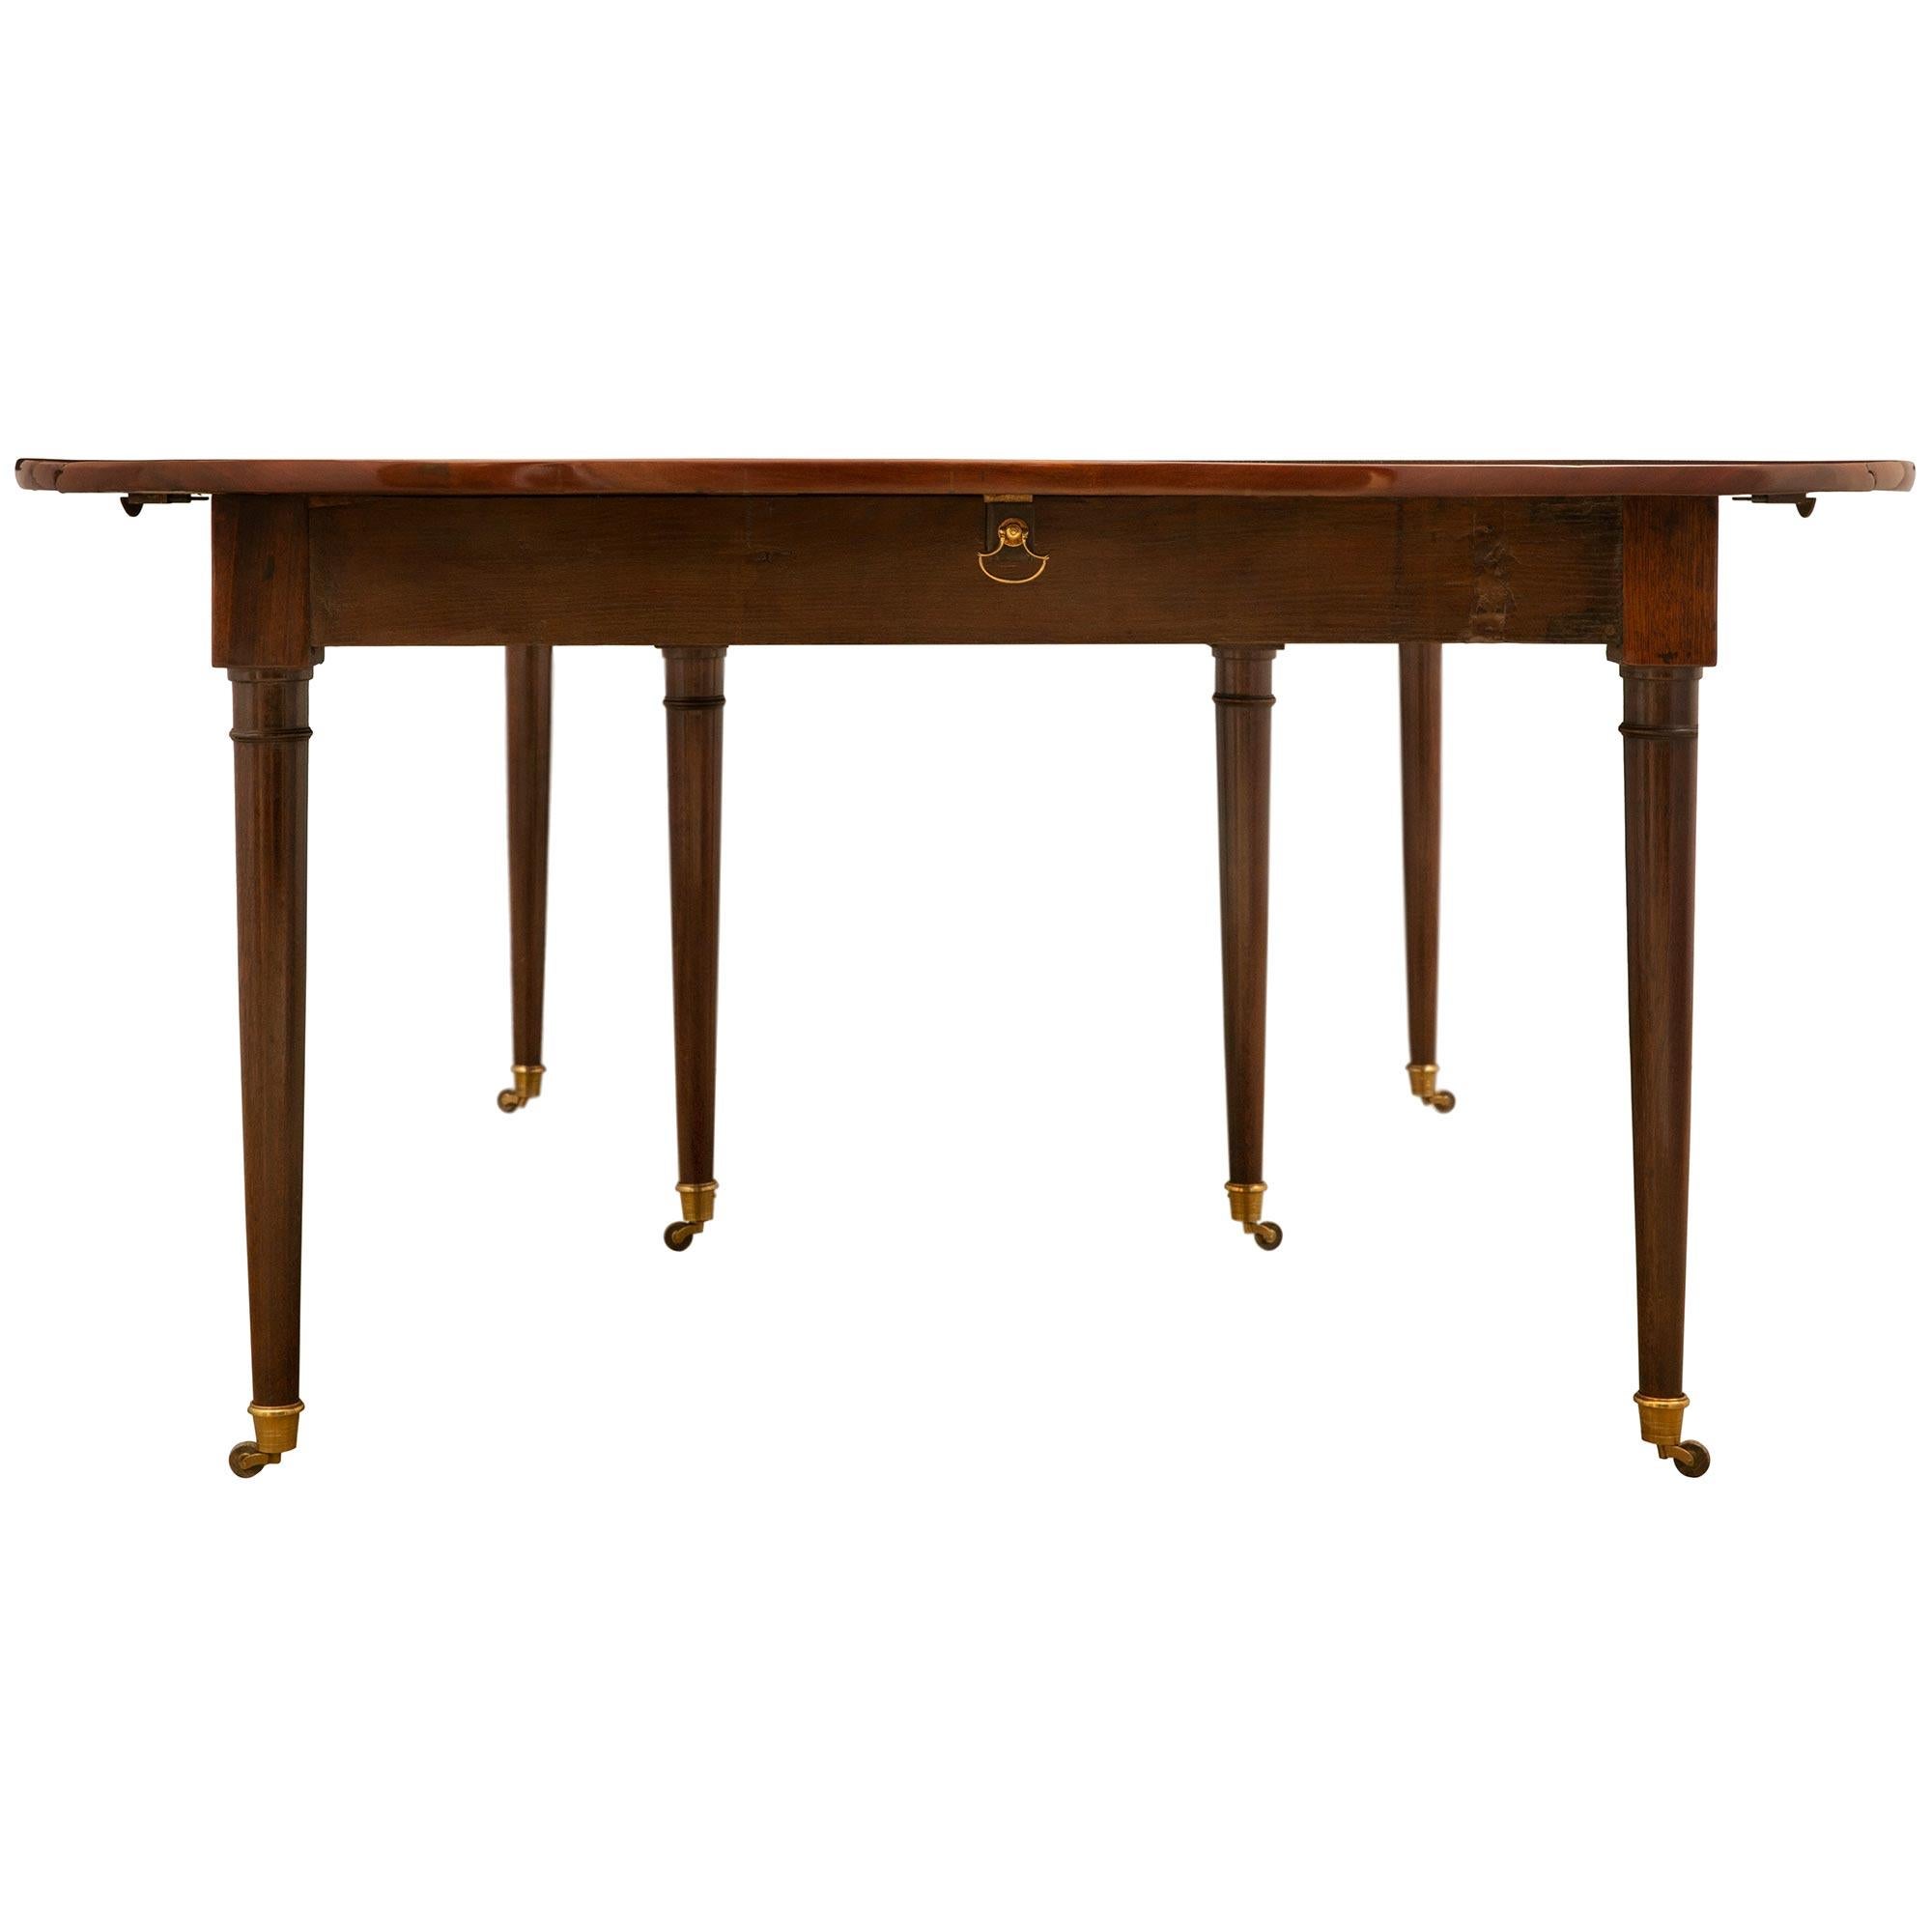 Early 19th Century French Louis XVI Style Mahogany Drop-Leaf Dining Table For Sale 3